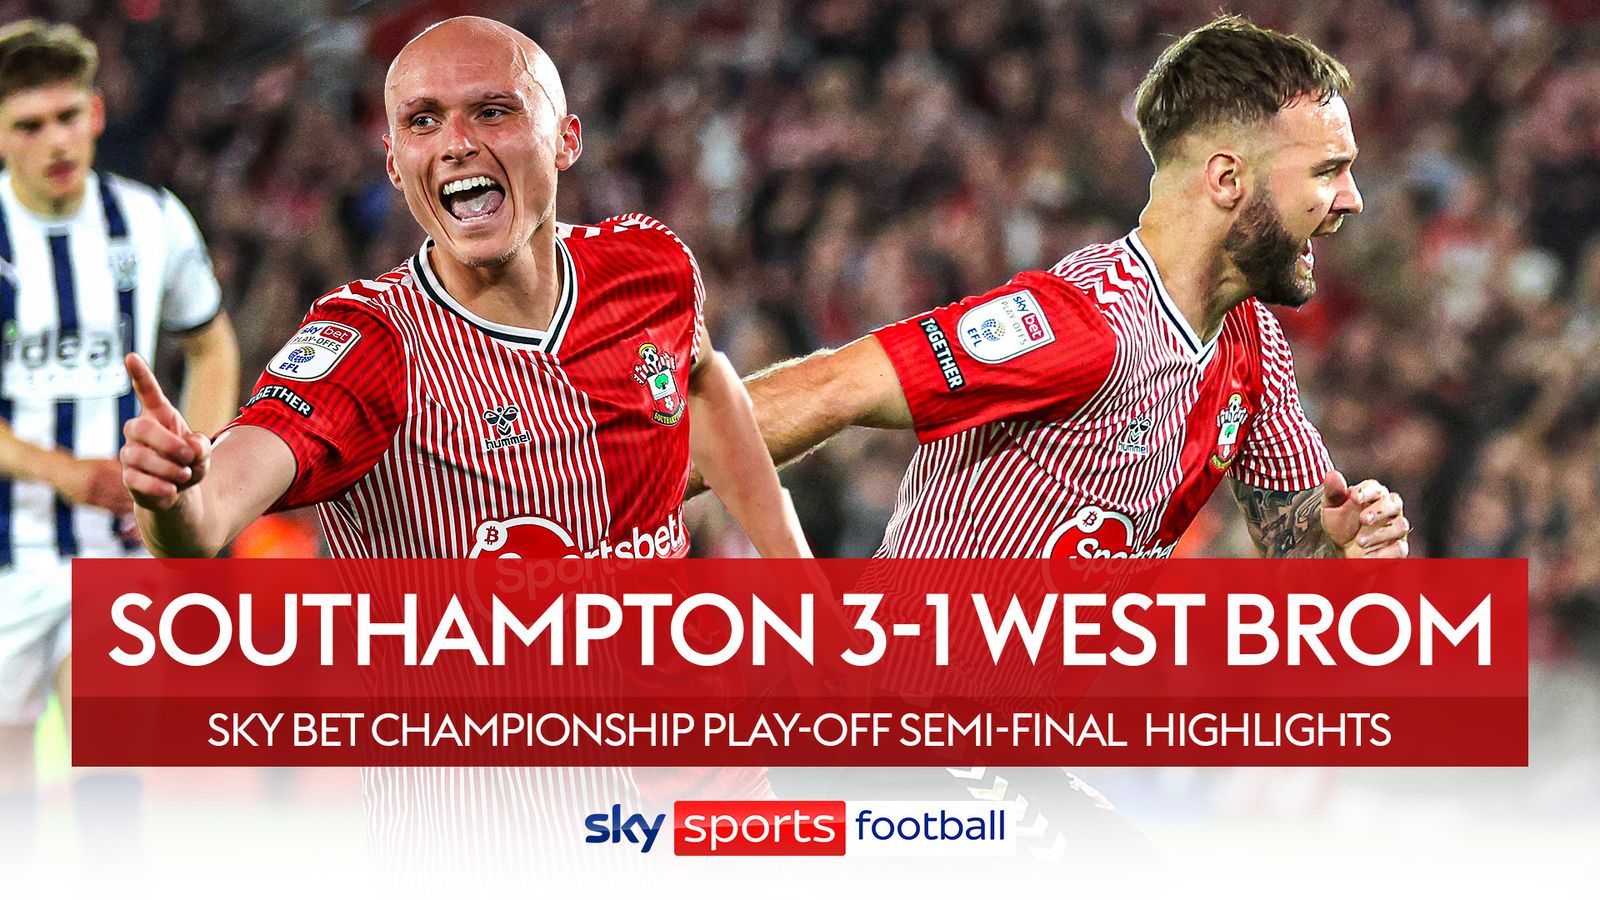 Southampton beat West Brom to secure Wembley spot